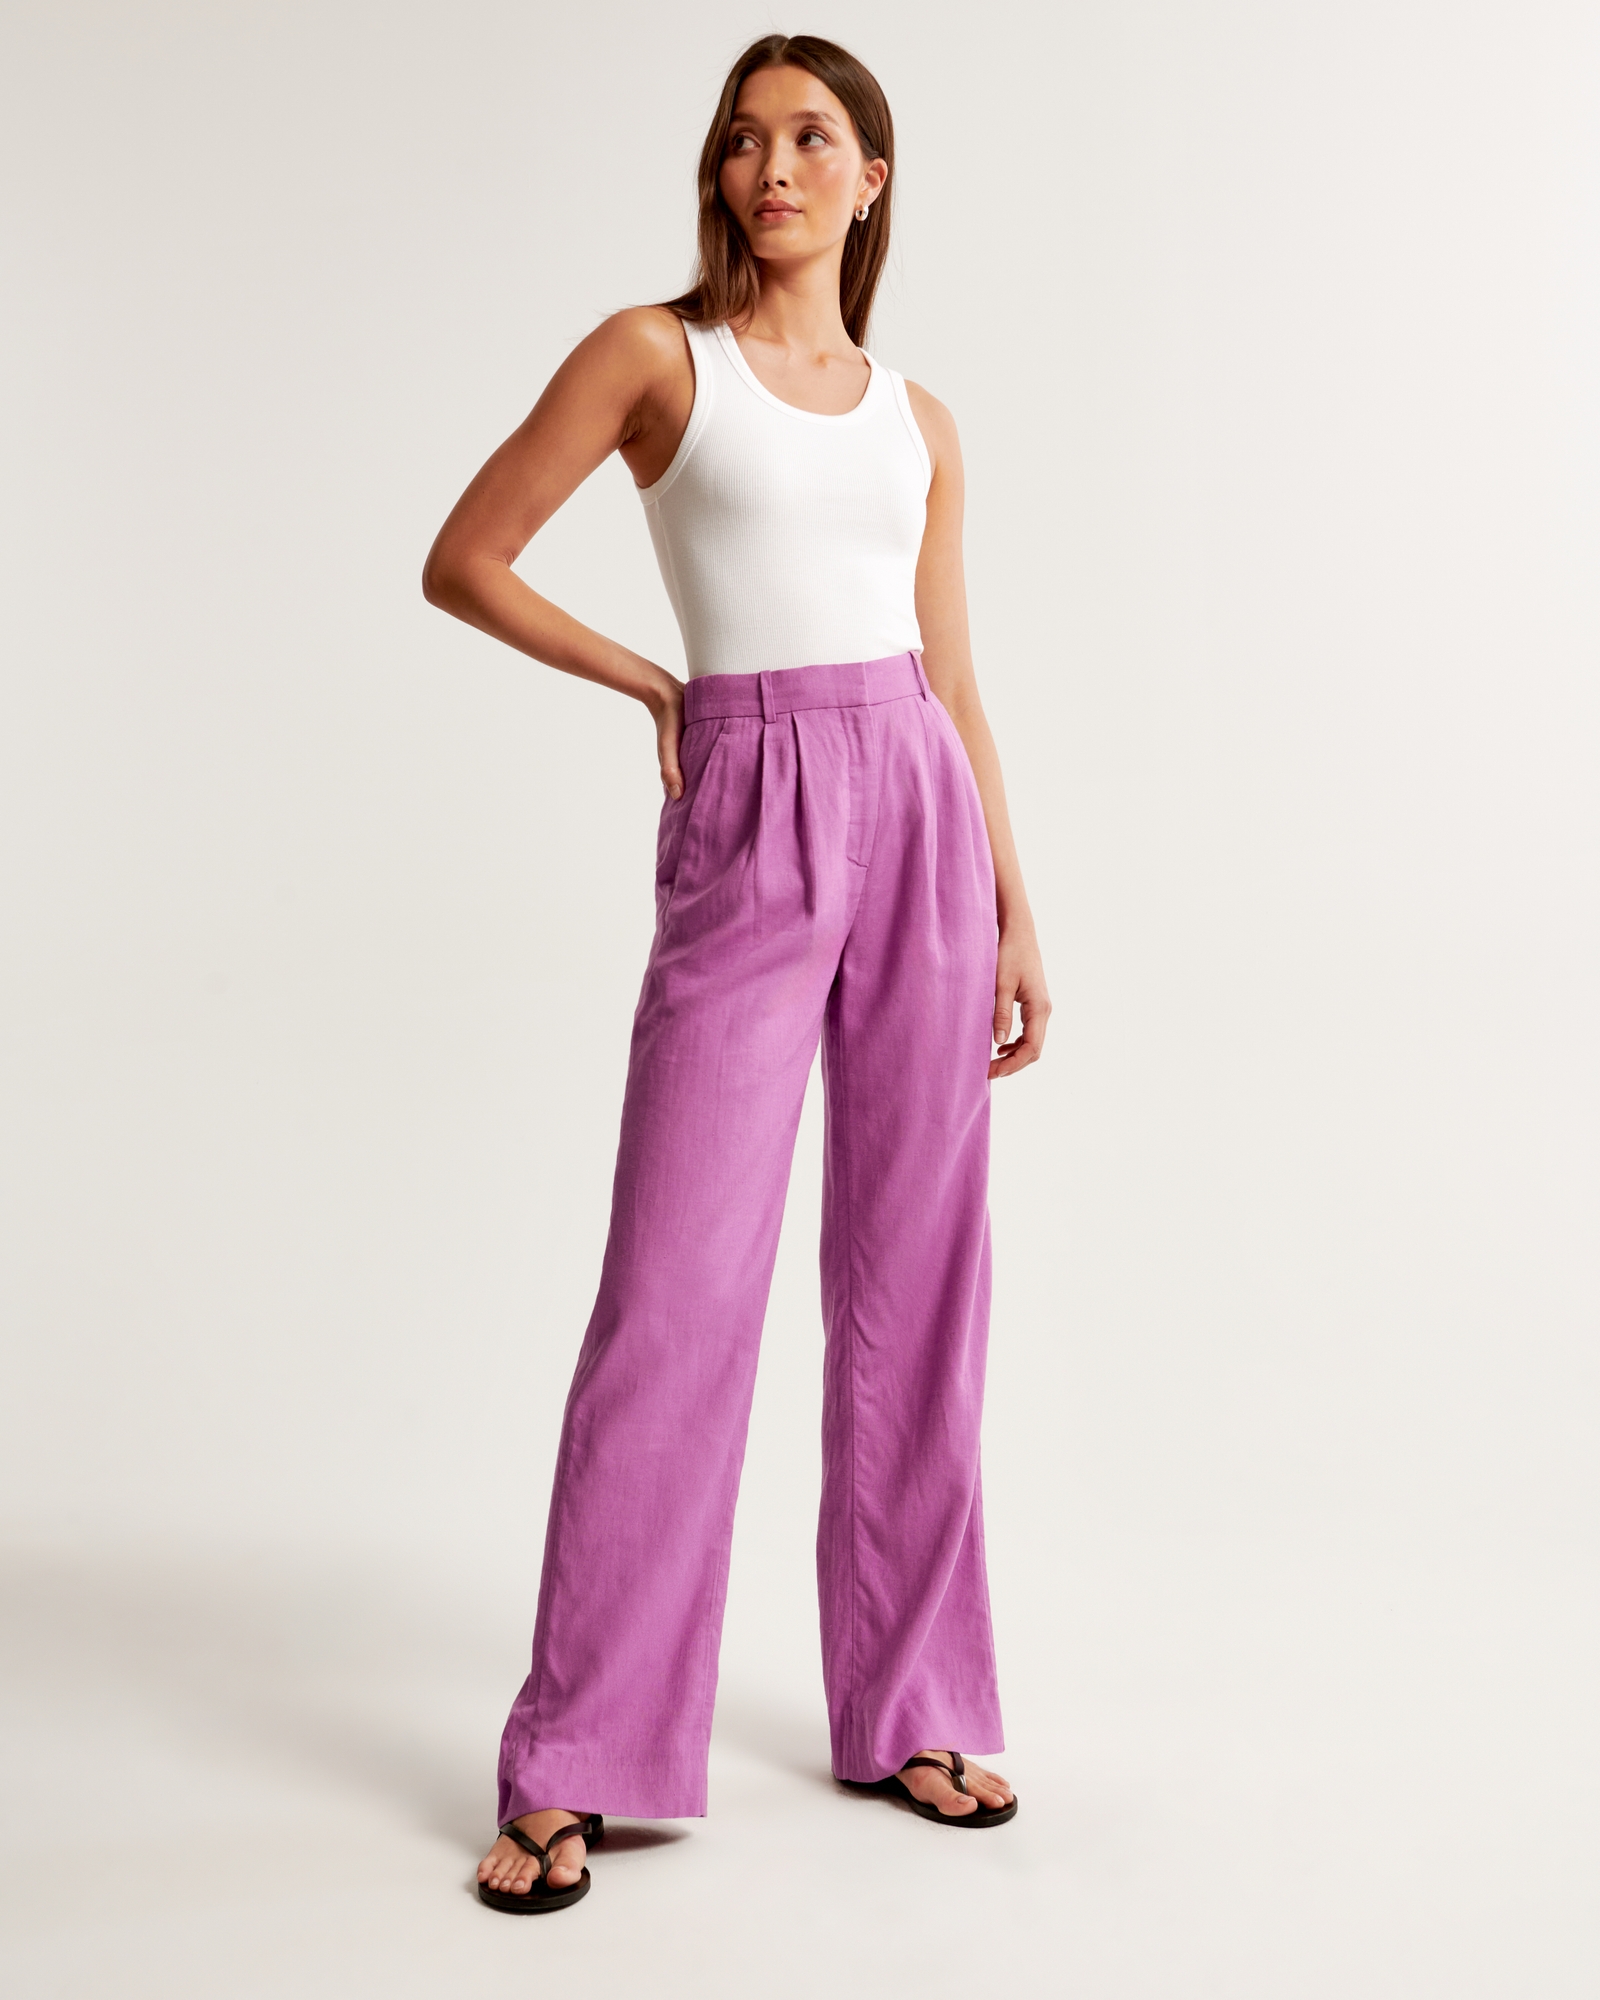 Sloane Low-Rise Pant in Linen - Night – Pharaoh Collection